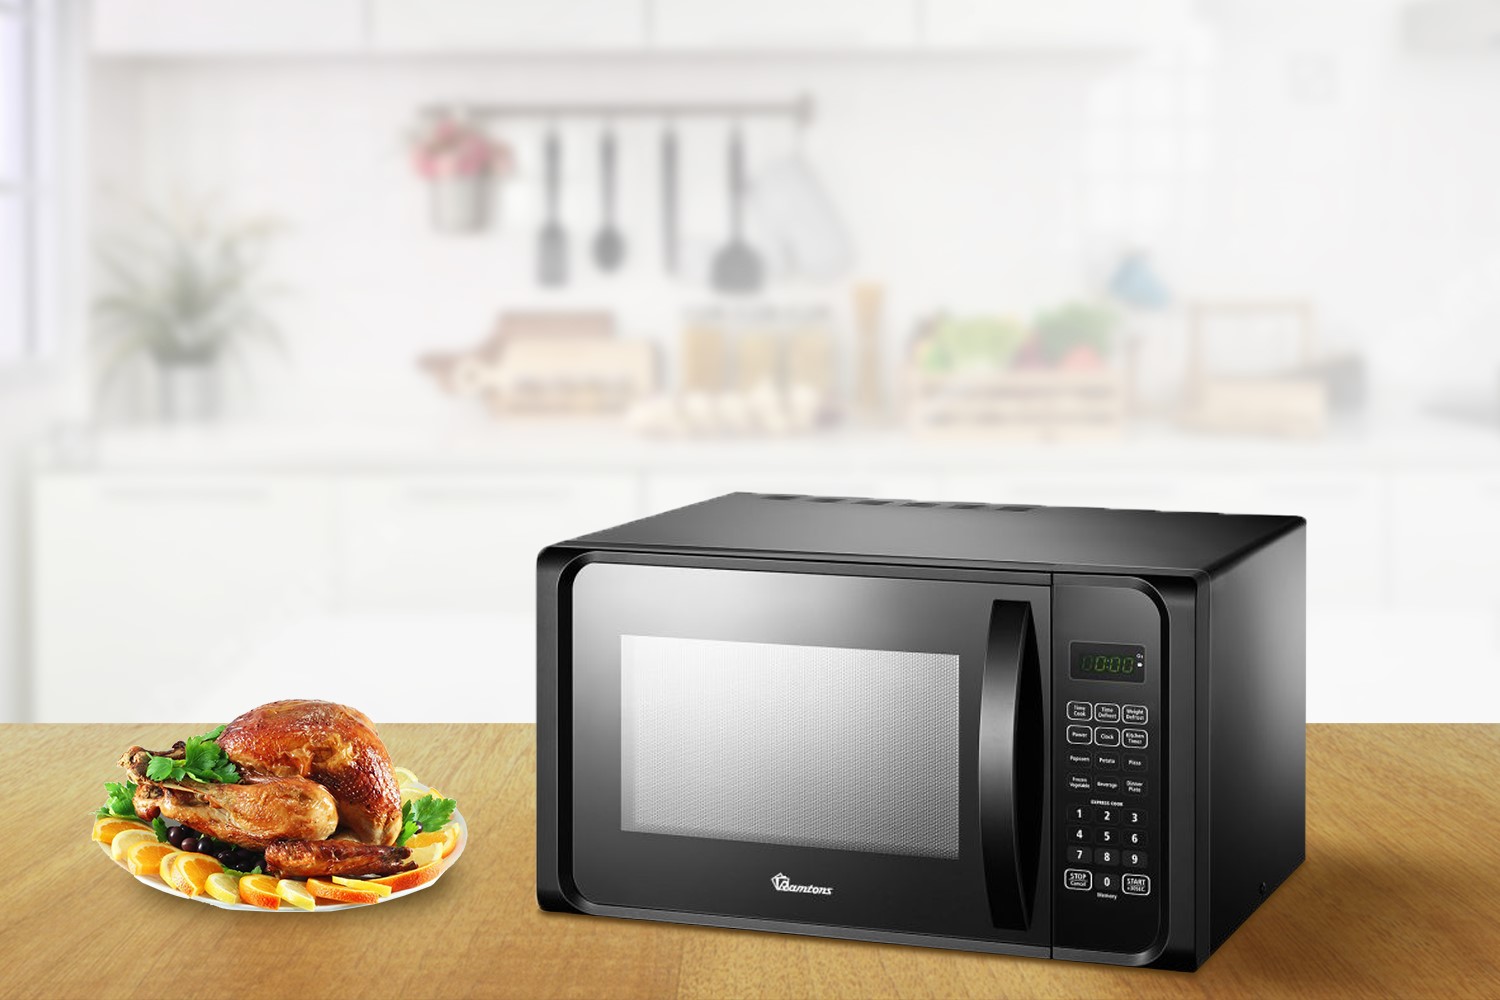 8 Ideal Ways To Use A Microwave